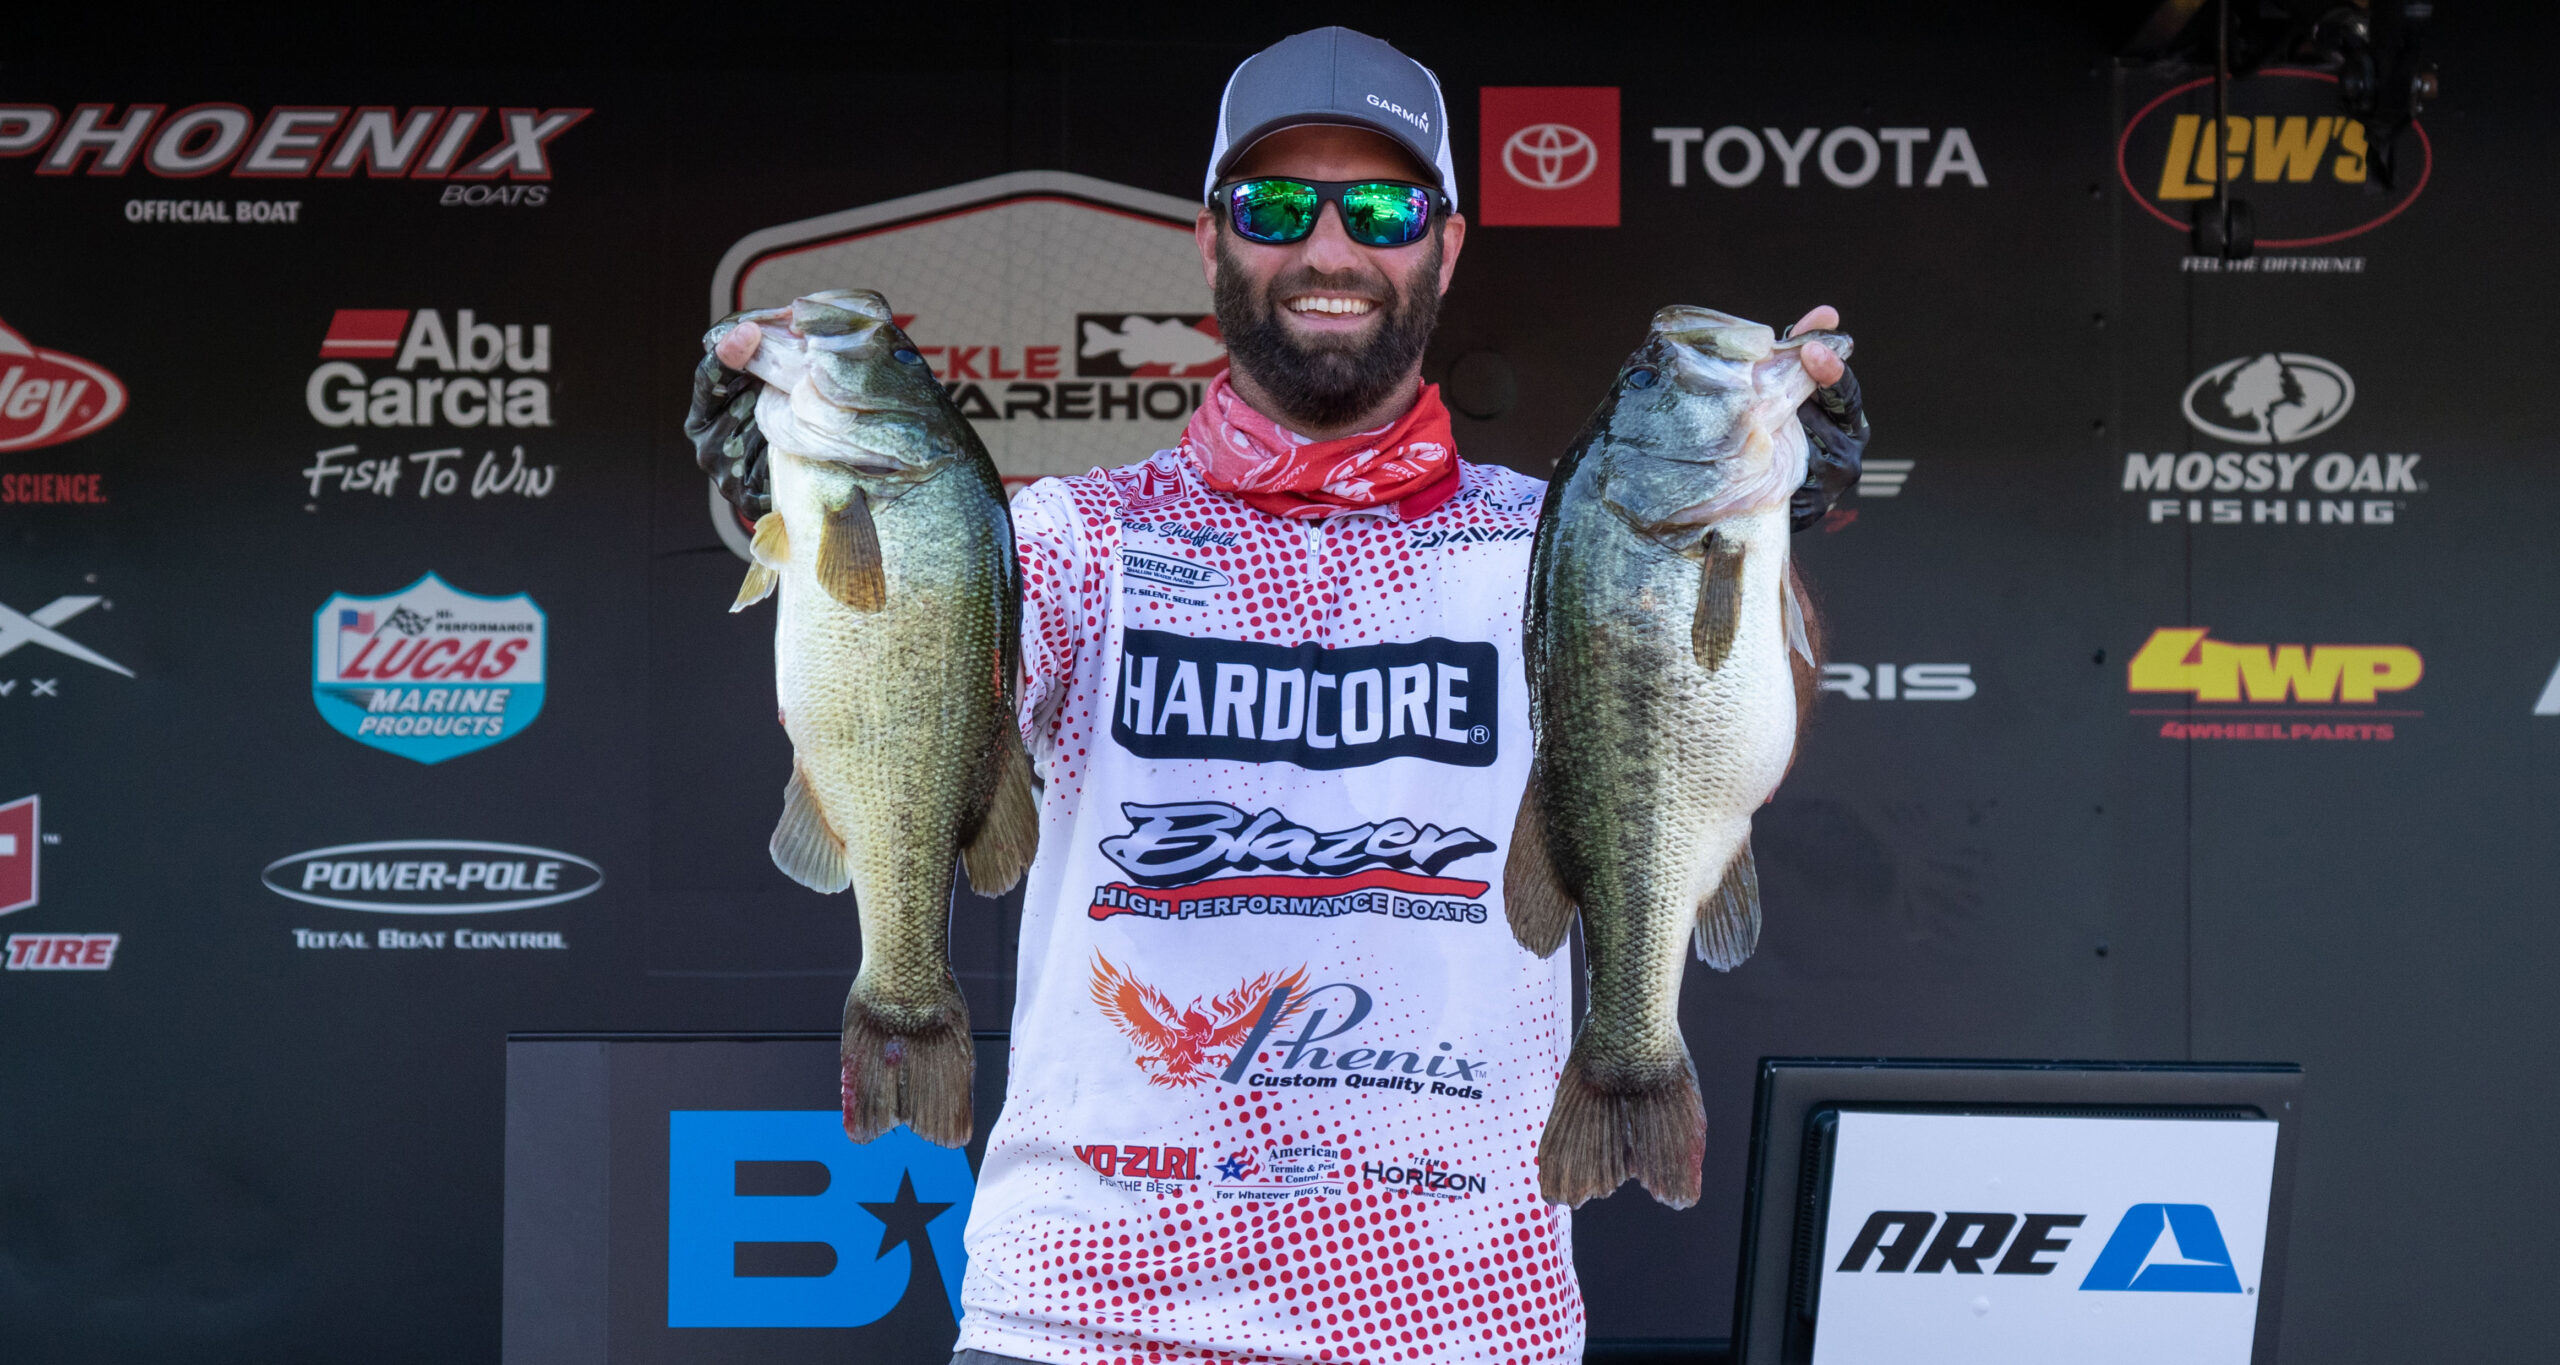 Spencer Shuffield Takes Early Lead on Day 1 of Tackle Warehouse